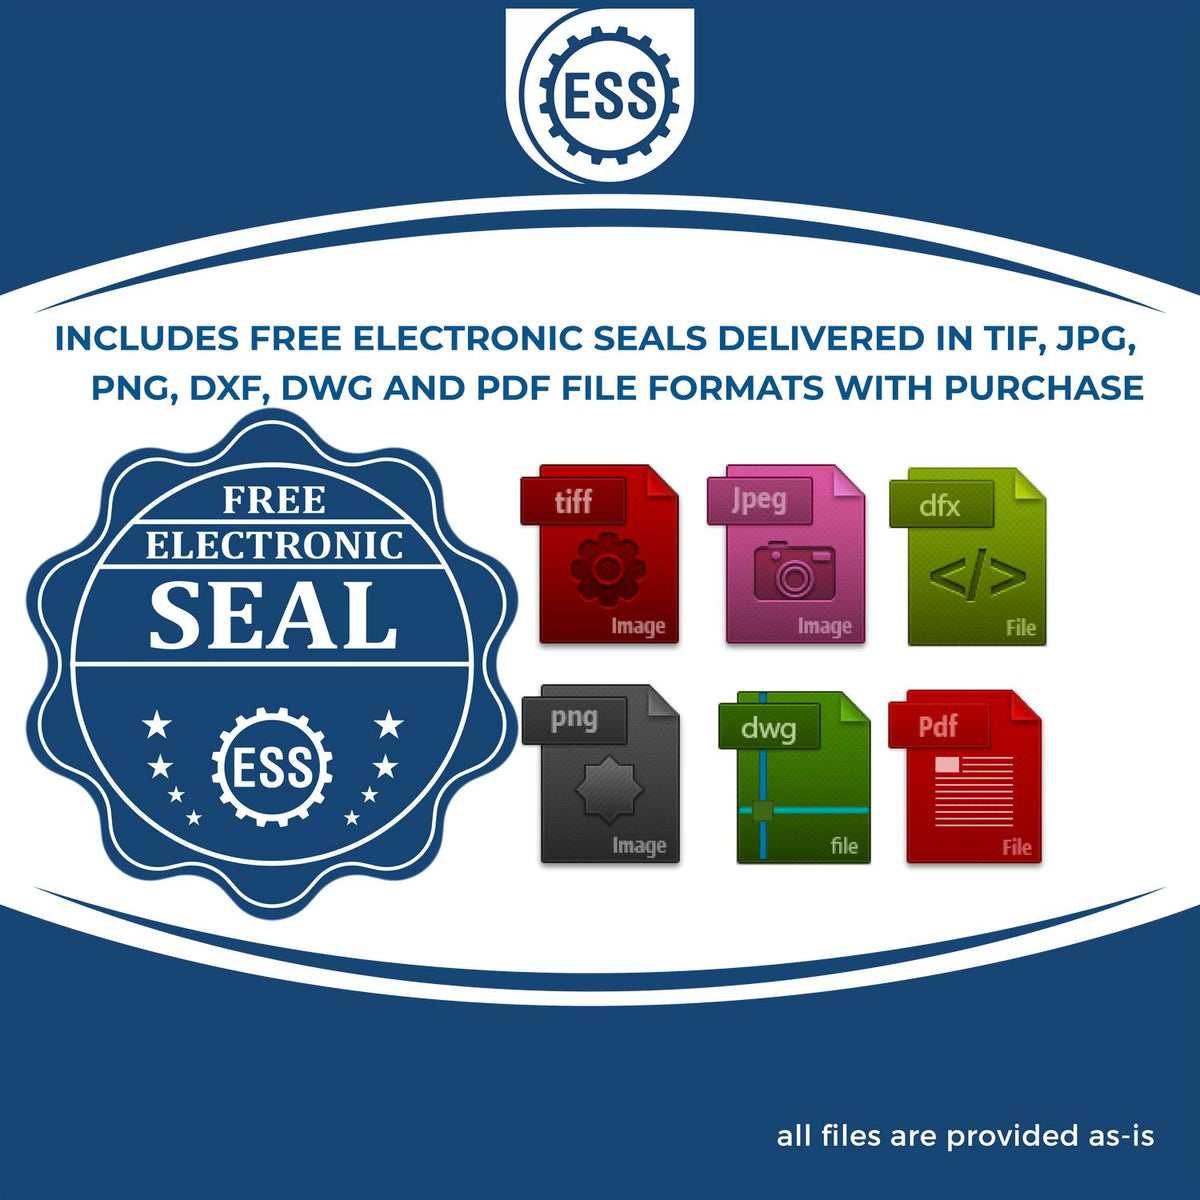 An infographic for the free electronic seal for the Soft Alaska Professional Engineer Seal illustrating the different file type icons such as DXF, DWG, TIF, JPG and PNG.